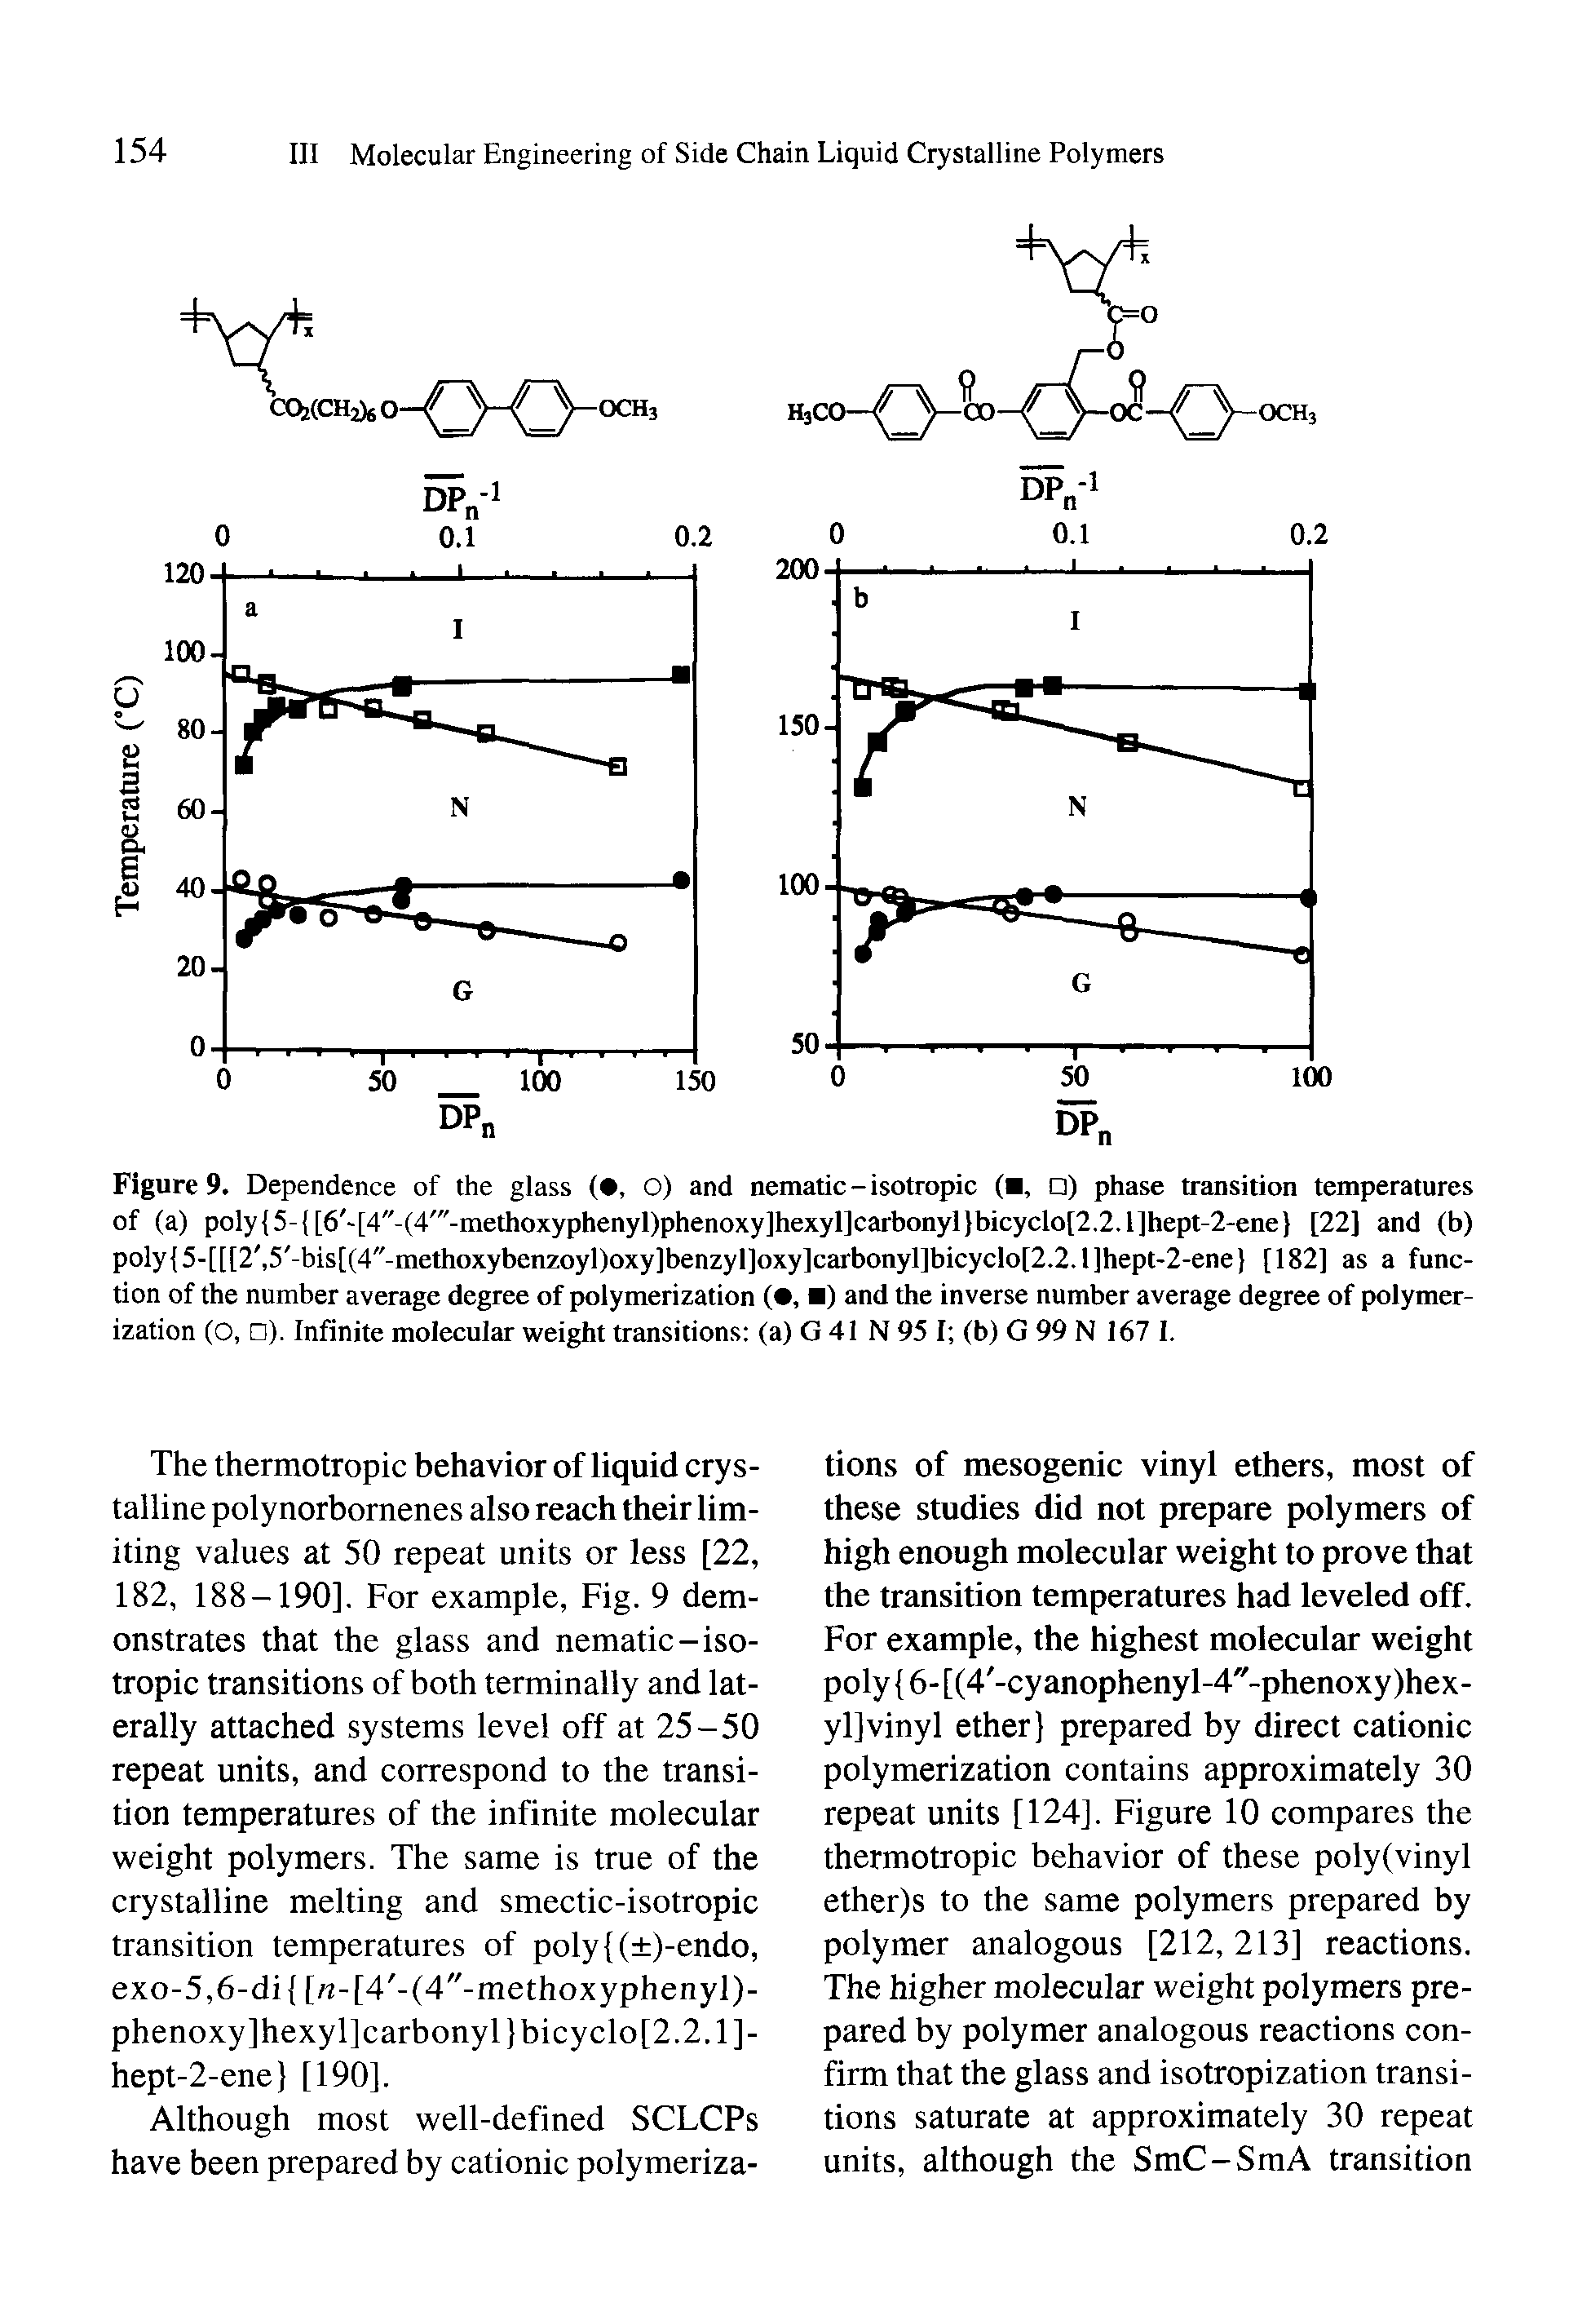 Figure 9. Dependence of the glass ( , O) and nematic-isotropic ( , O) phase transition temperatures of (a) poly 5- [6 [4"-(4" -methoxyphenyl)phenoxy]hexyl]carbonyl)bicyclo[2.2.i]hept-2-ene [22] and (b) poly 5-[[[2, 5 -bis[(4"-methoxybenzoyl)oxy]benzyl]oxy]carbonyl]bicyclo[2.2.1]hept-2-ene [182] as a function of the number average degree of polymerization ( , ) and the inverse number average degree of polymerization (O, ). Infinite molecular weight transitions (a) G 41 N 95 I (b) G 99 N 167 I.